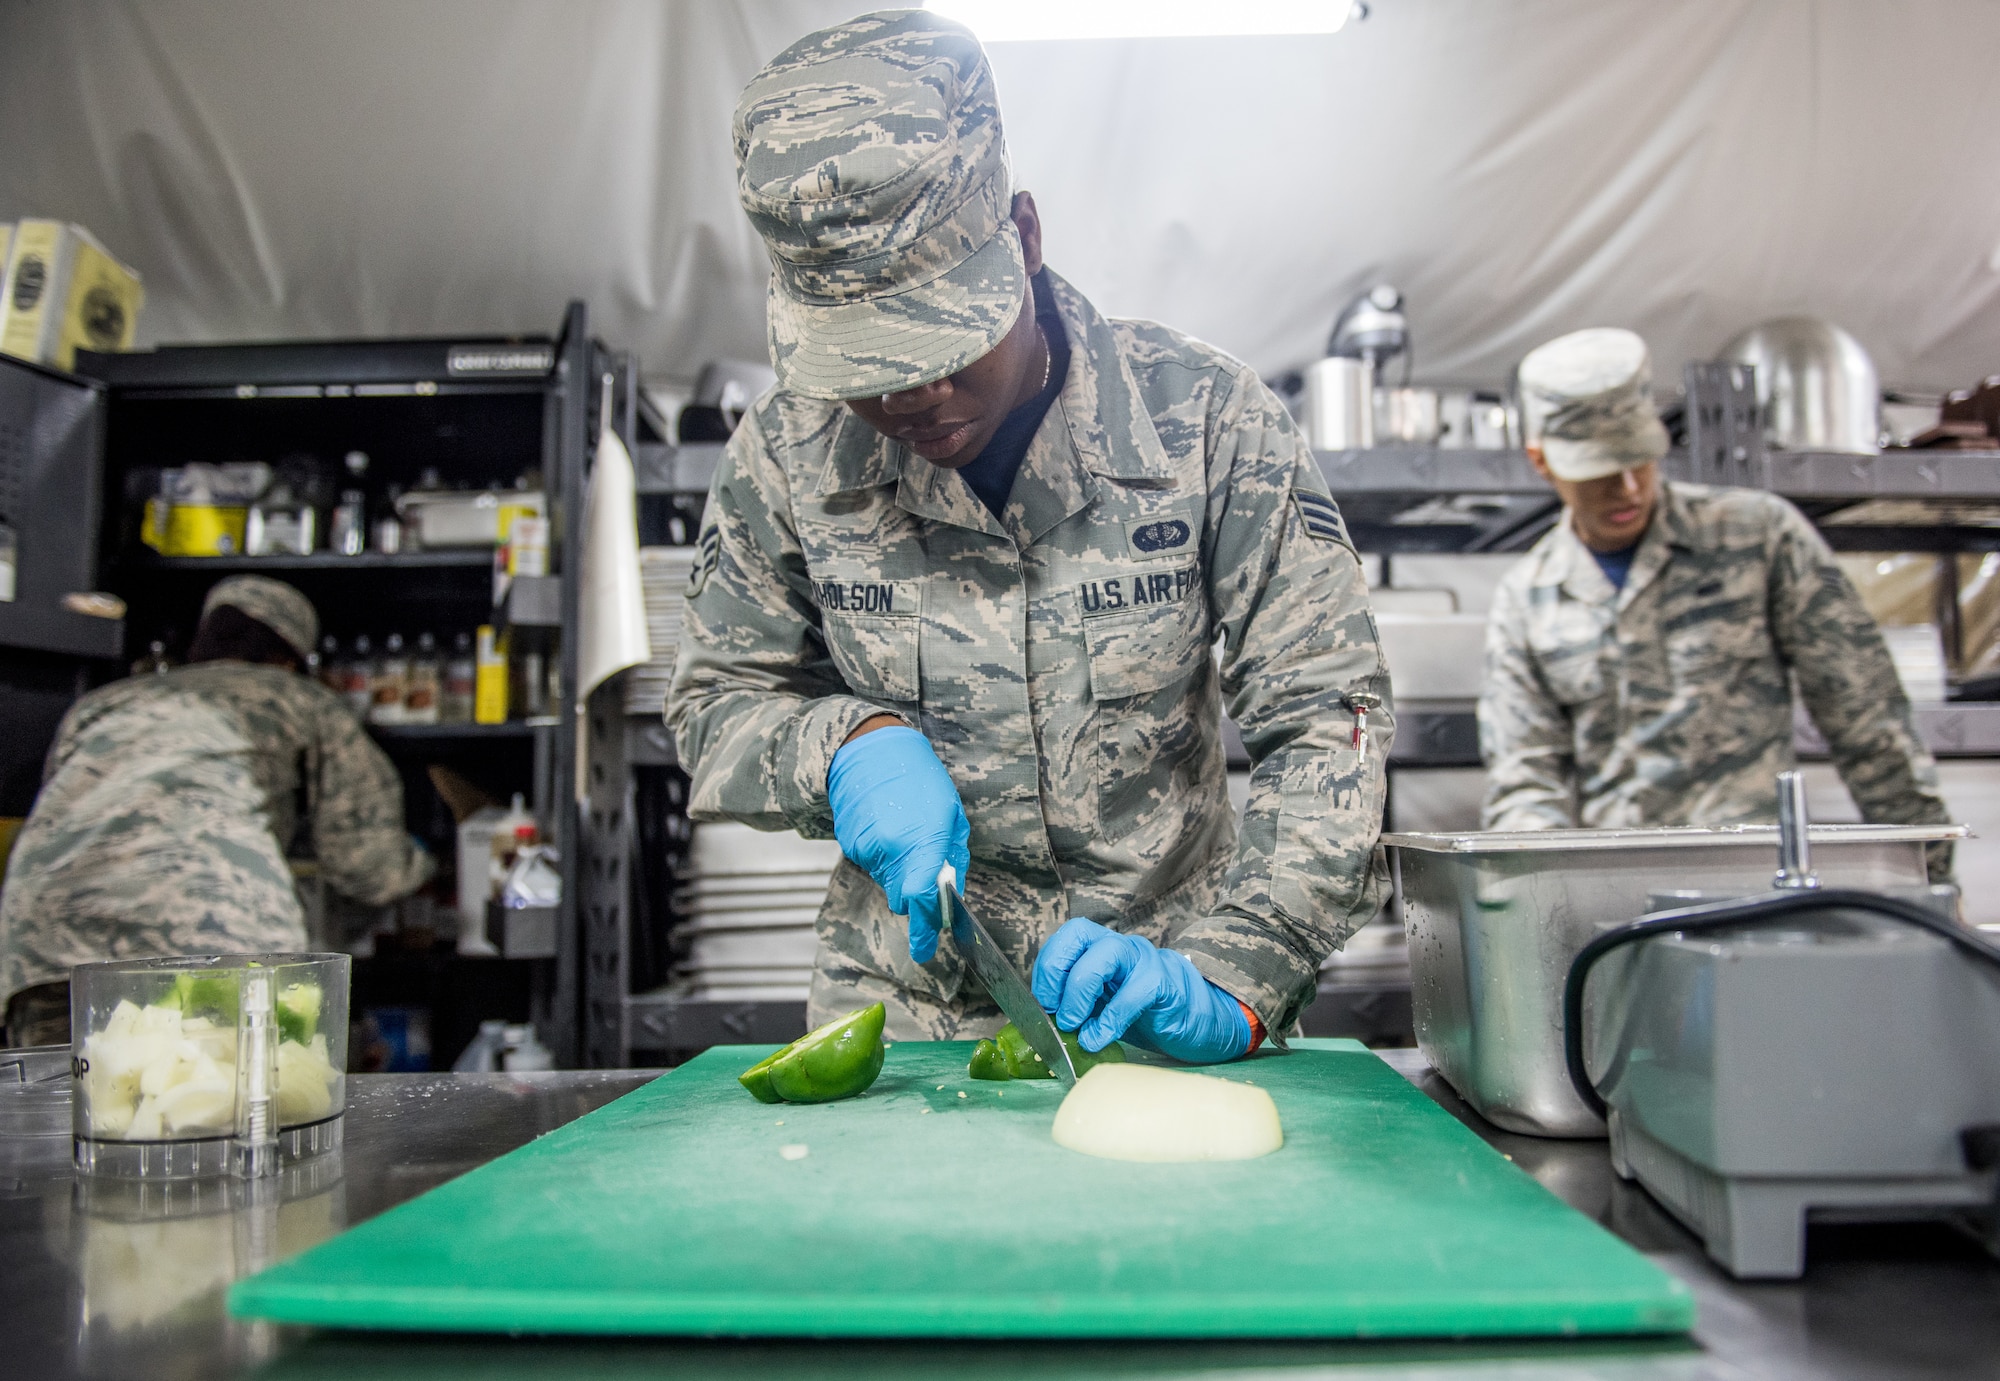 Senior Airman Samoya Nicholson, 512th Memorial Affairs food services shift supervisor, slices a pepper during the John L. Hennessy food service competition at Dobbins Air Reserve Base, Georgia, March 9, 2019. The 2019 John L. Hennessy food service competition was held at Dobbins ARB’s Silver Flag site. (U.S. Air Force photo by Staff Sgt. Damien Taylor)